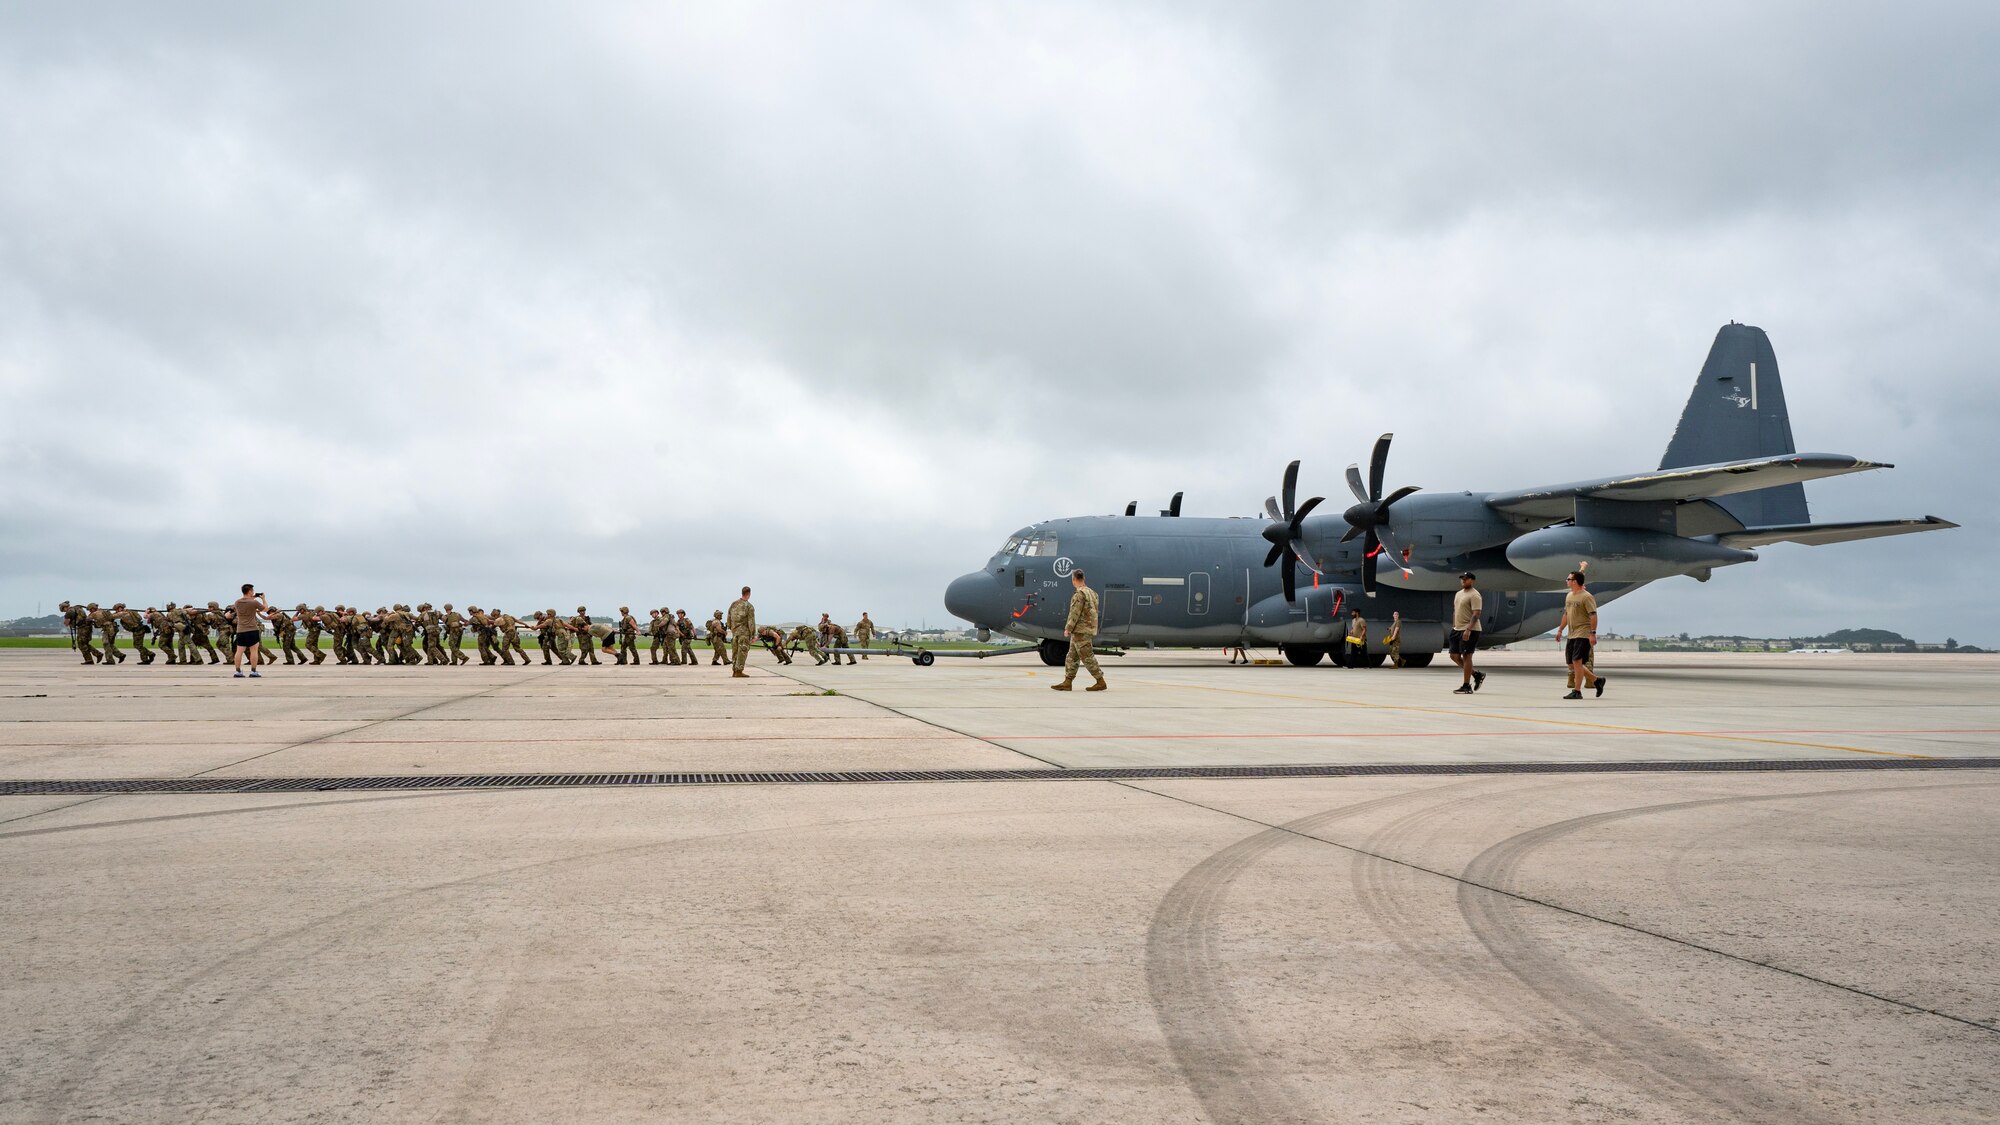 U.S. Air Force special tactics Airmen with the 320th Special Tactics Squadron pull an MC-130J Commando II 150 meters across the parking apron during Monster Mash, an operational readiness and resilience training, at Kadena Air Base, Japan, May 5, 2023. These training events, consisting of various physically and mentally demanding tasks, are routinely conducted among special tactics units to ensure operational readiness and enhance resiliency among the operators. (U.S. Air Force photo by Staff Sgt. Jessi Roth)